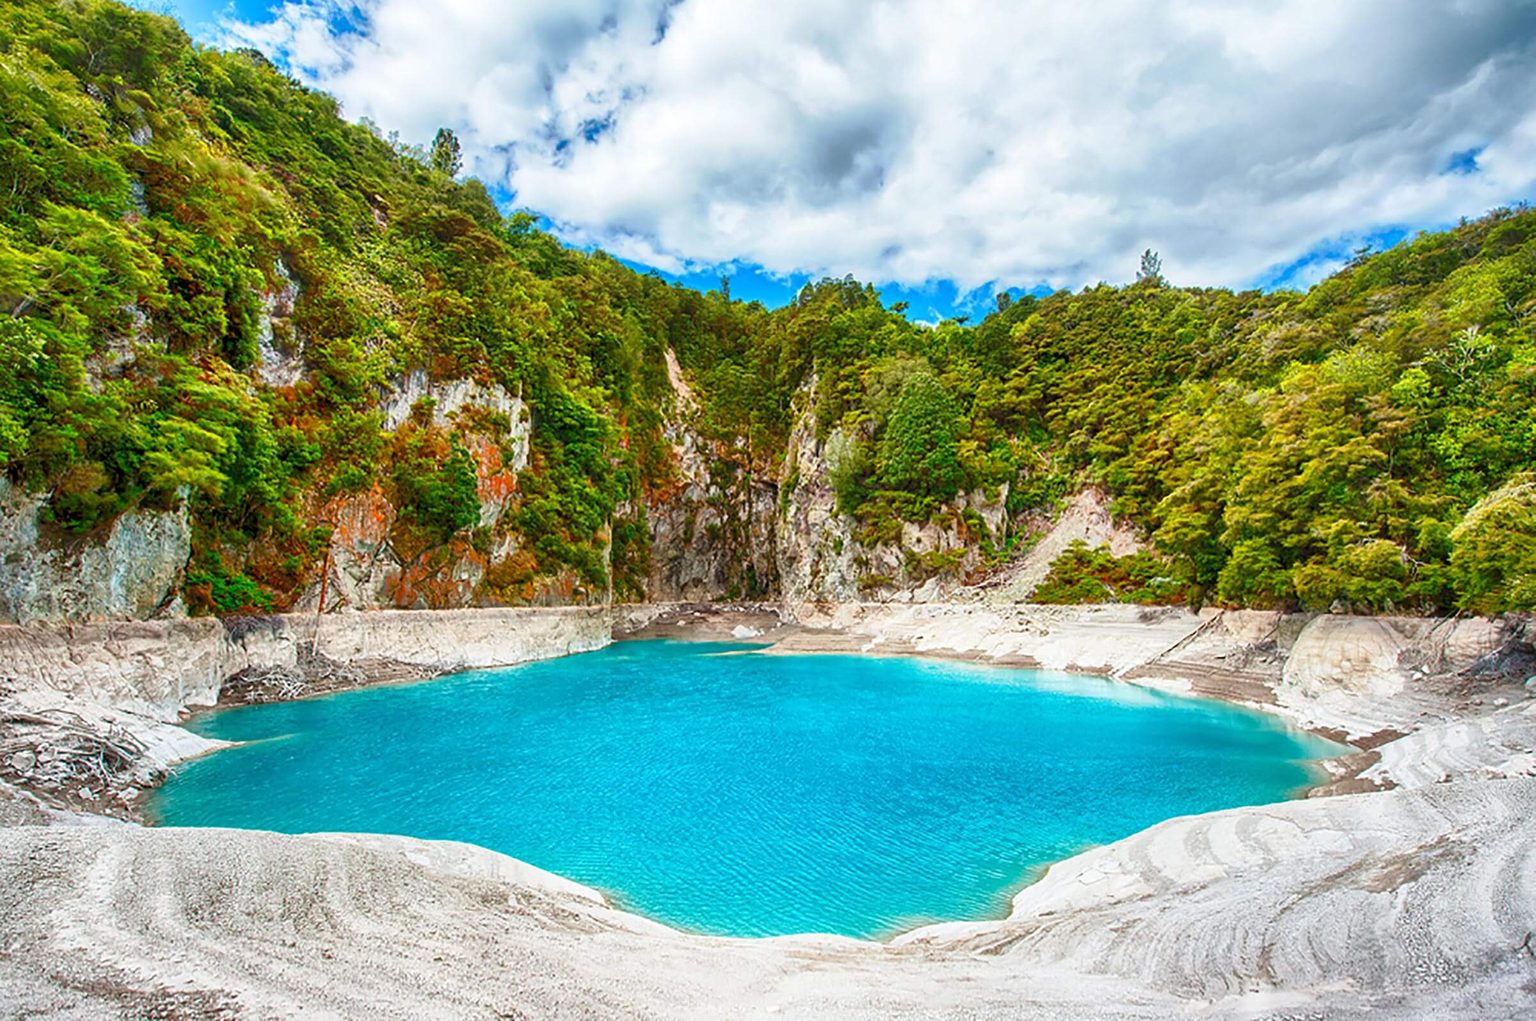 The Most Gorgeous Hot Springs in the World | Reader's Digest